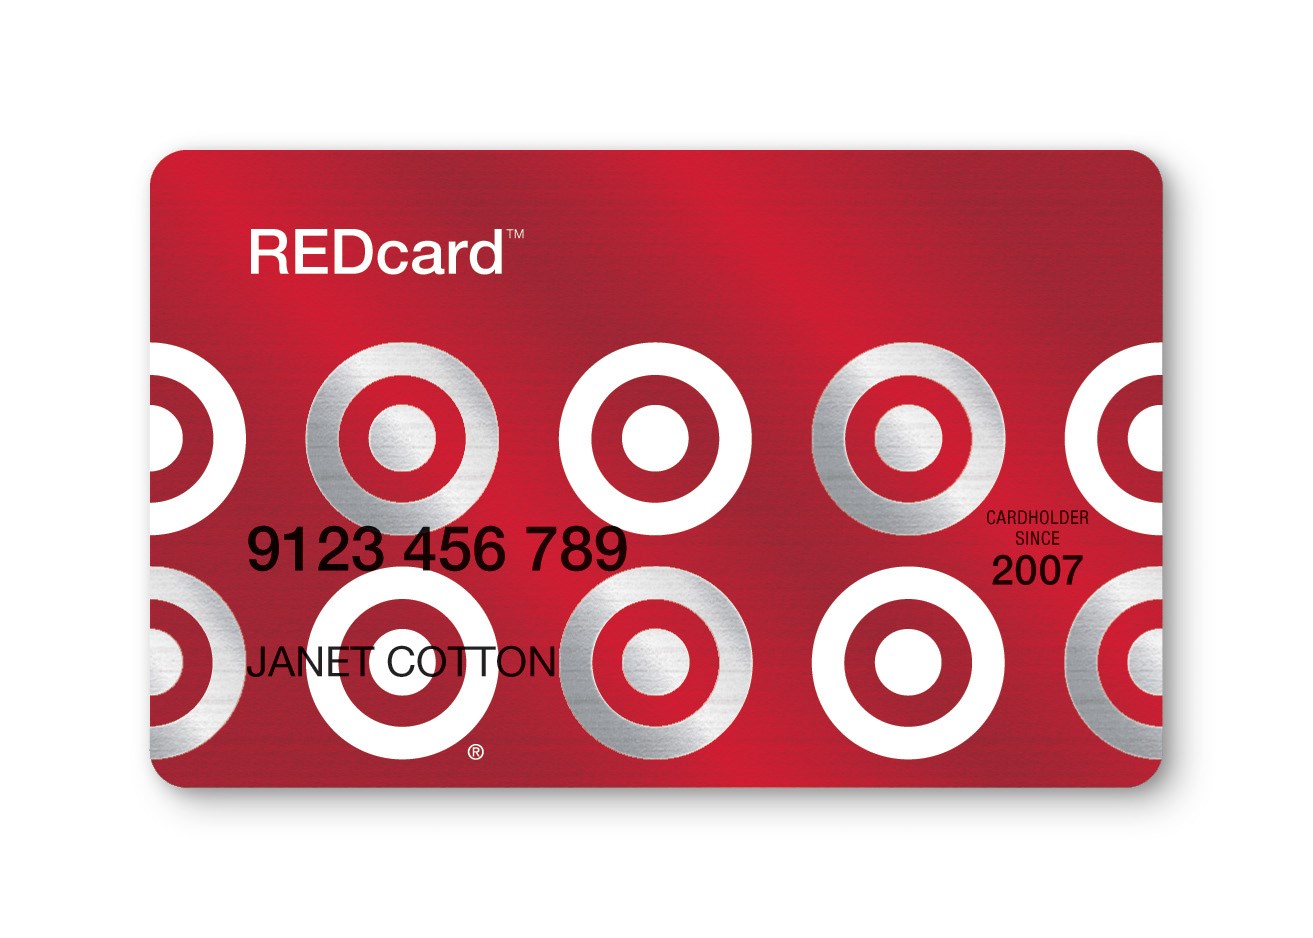 Target RedCard Credit Card - Learn How to Order